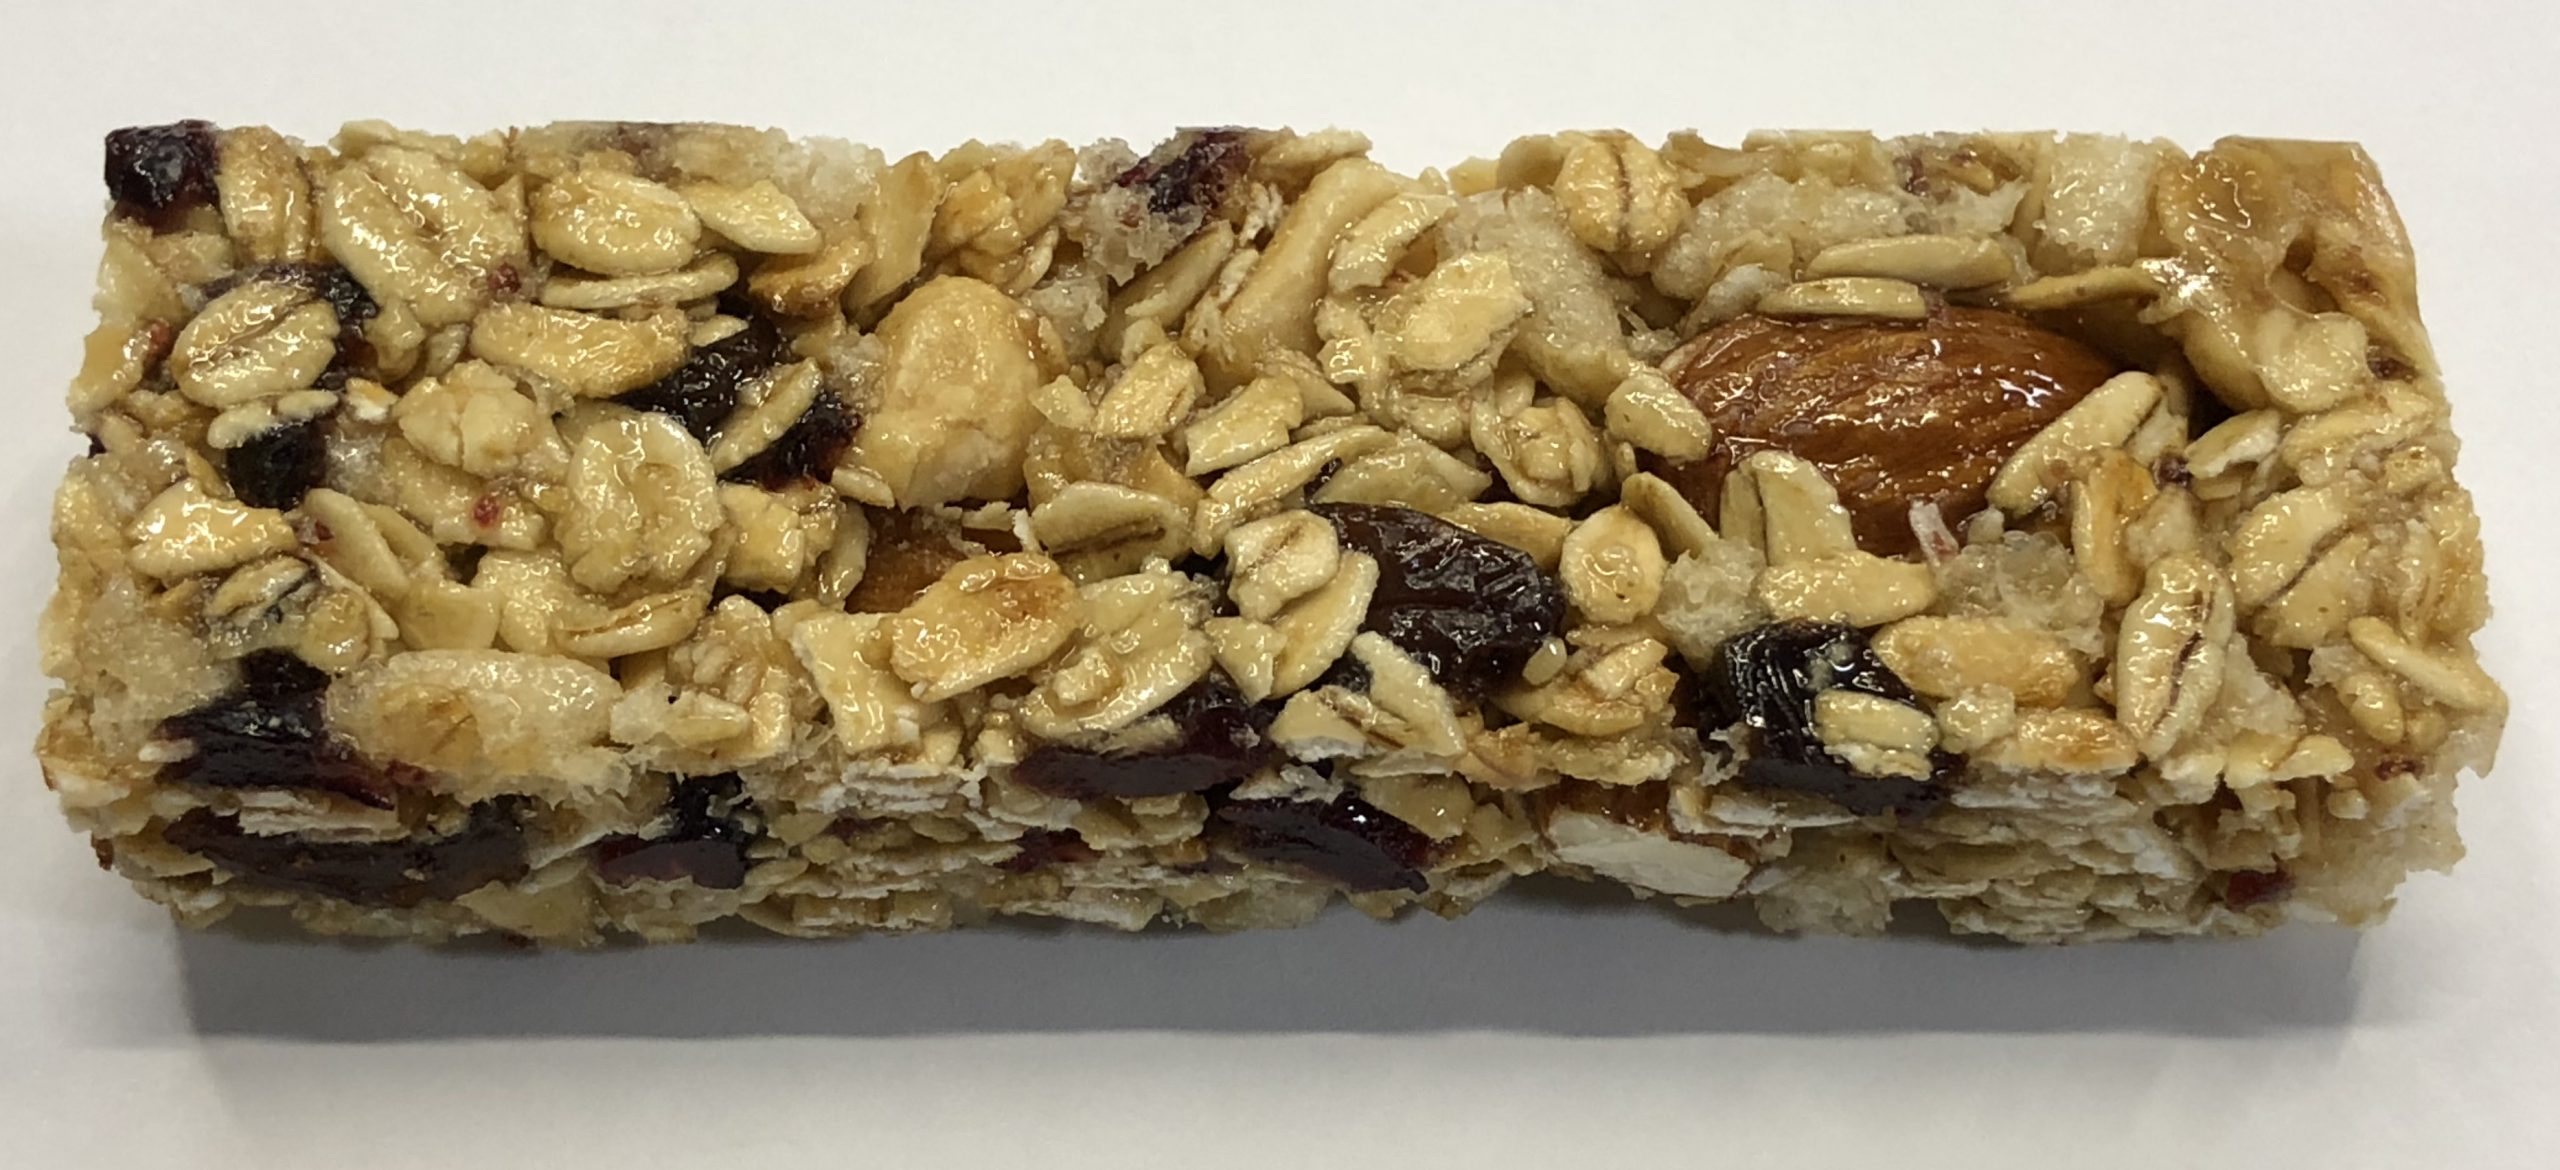 granola bar - pale brown oat flakes, dark fruit, golden brown nuts - on white background